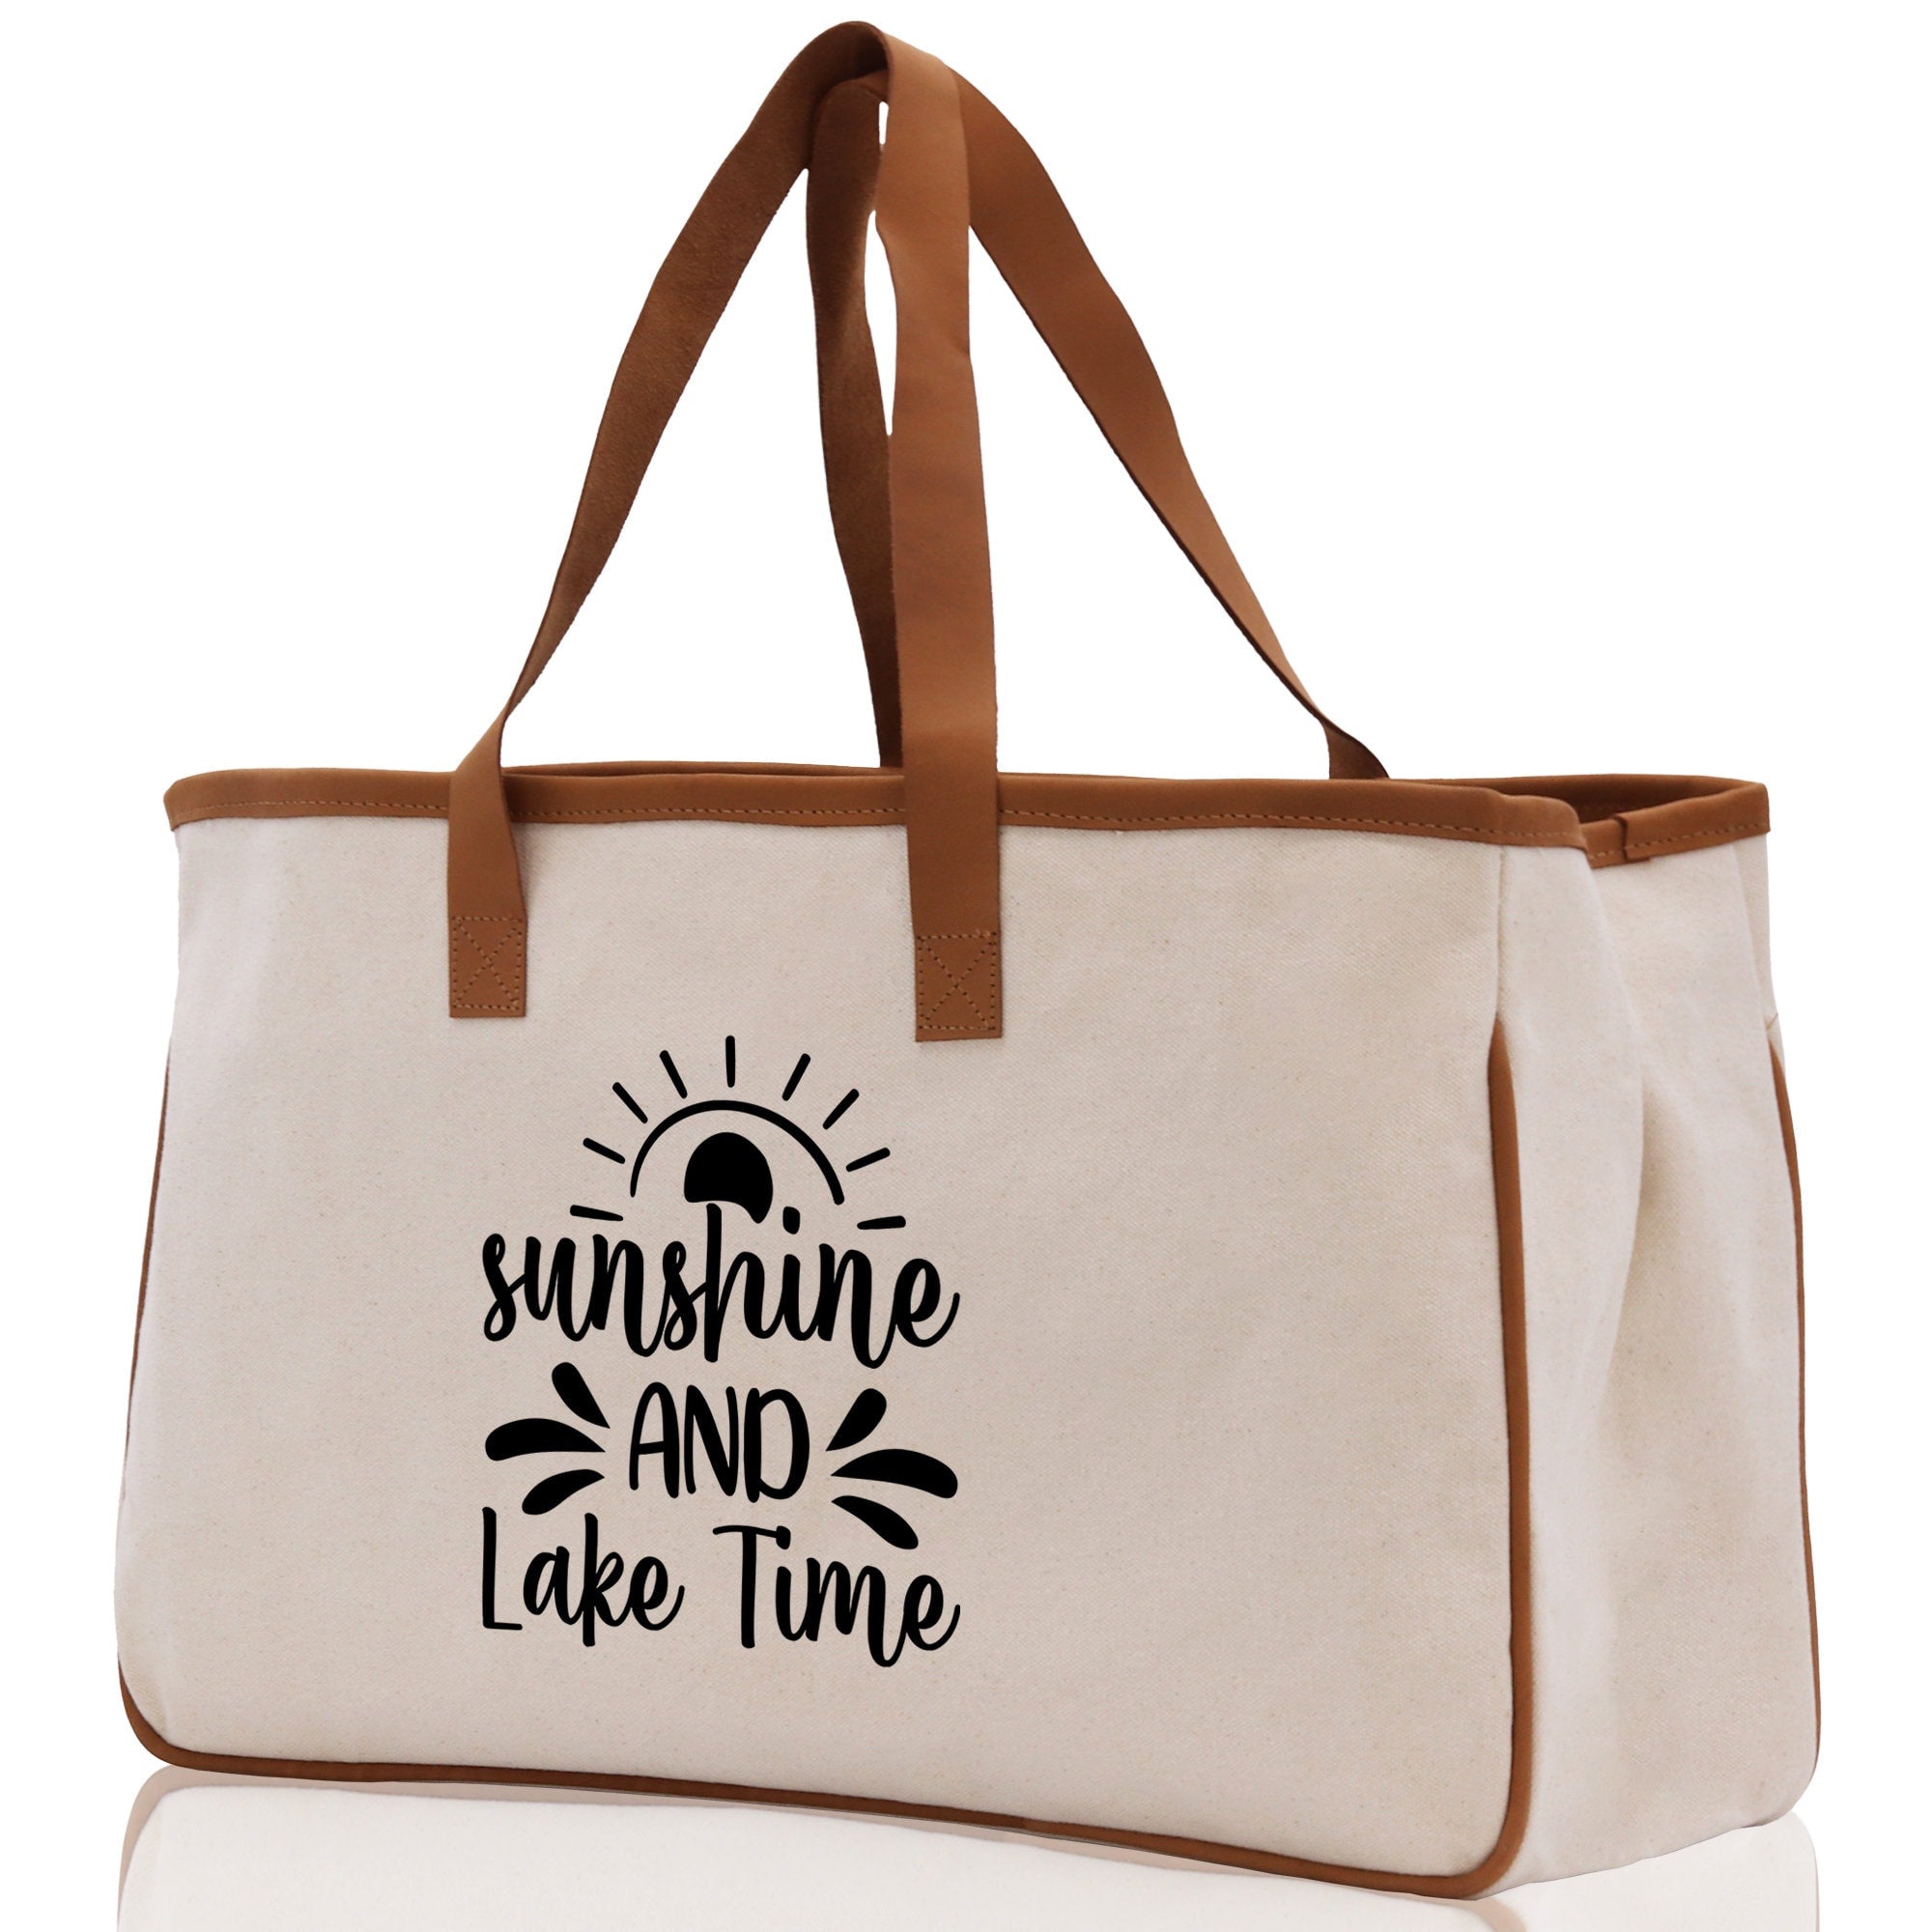 Sunshine and Lake Time Cotton Canvas Chic Tote Bag Camping Tote Lake Lover Gift Tote Bag Outdoor Tote Weekender Tote Laker Tote